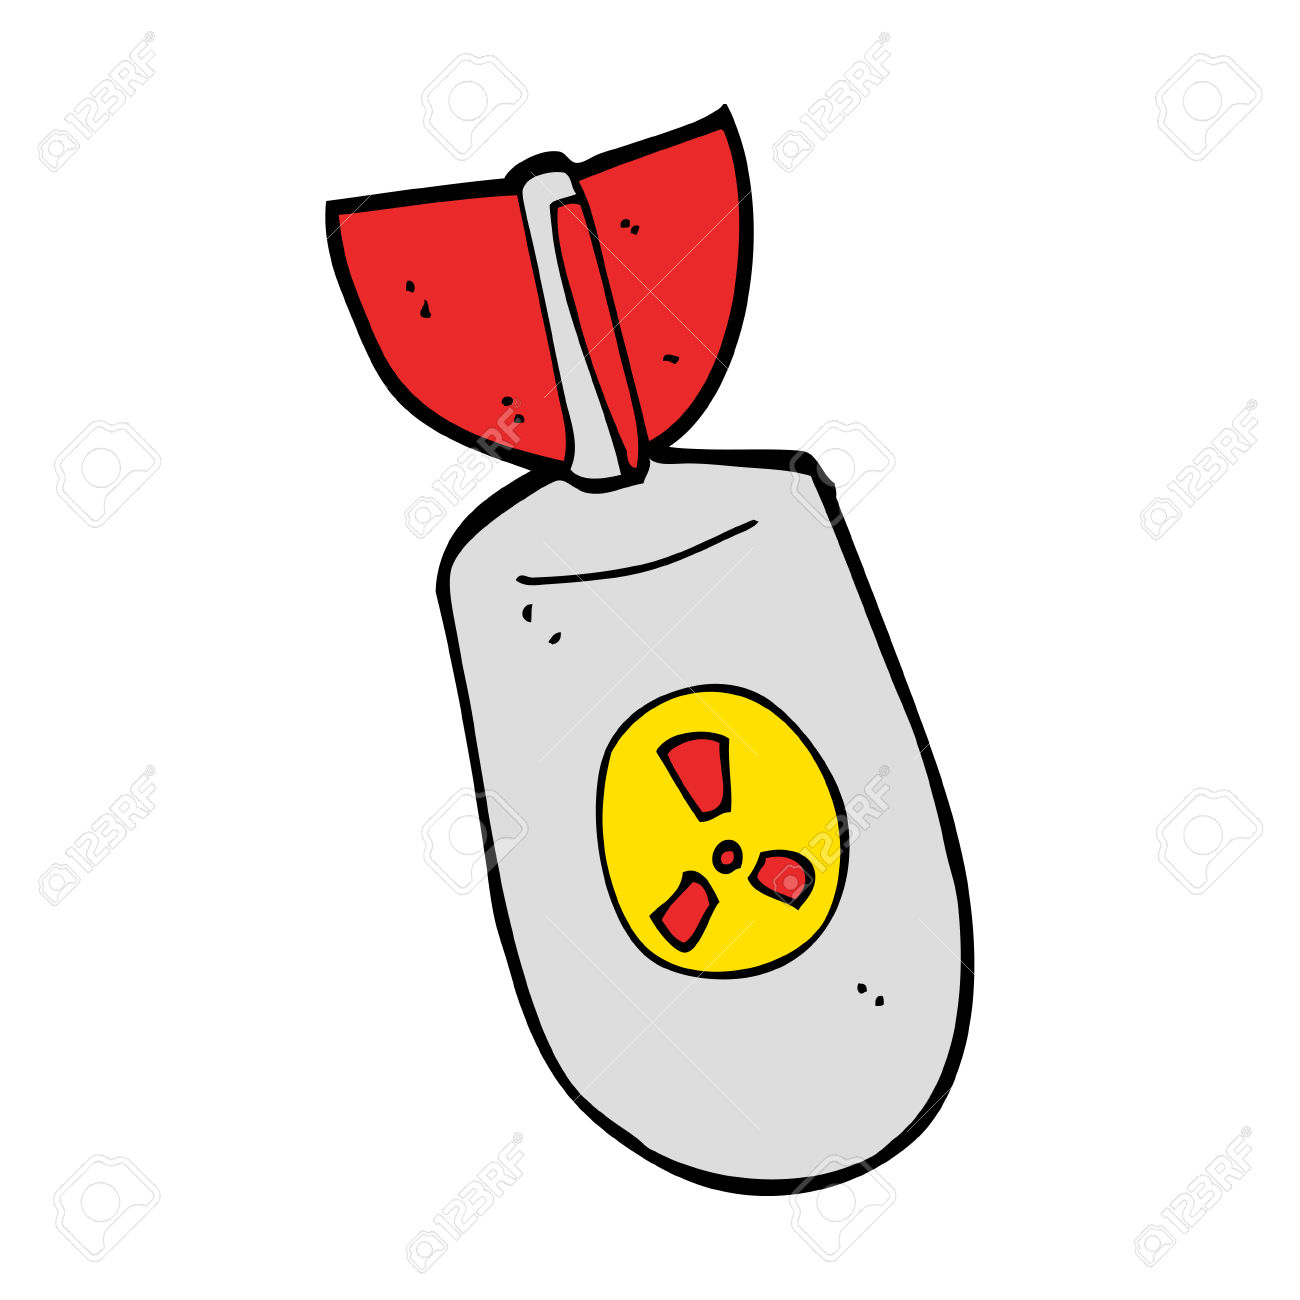 Bomb clipart nuclear.  collection of high